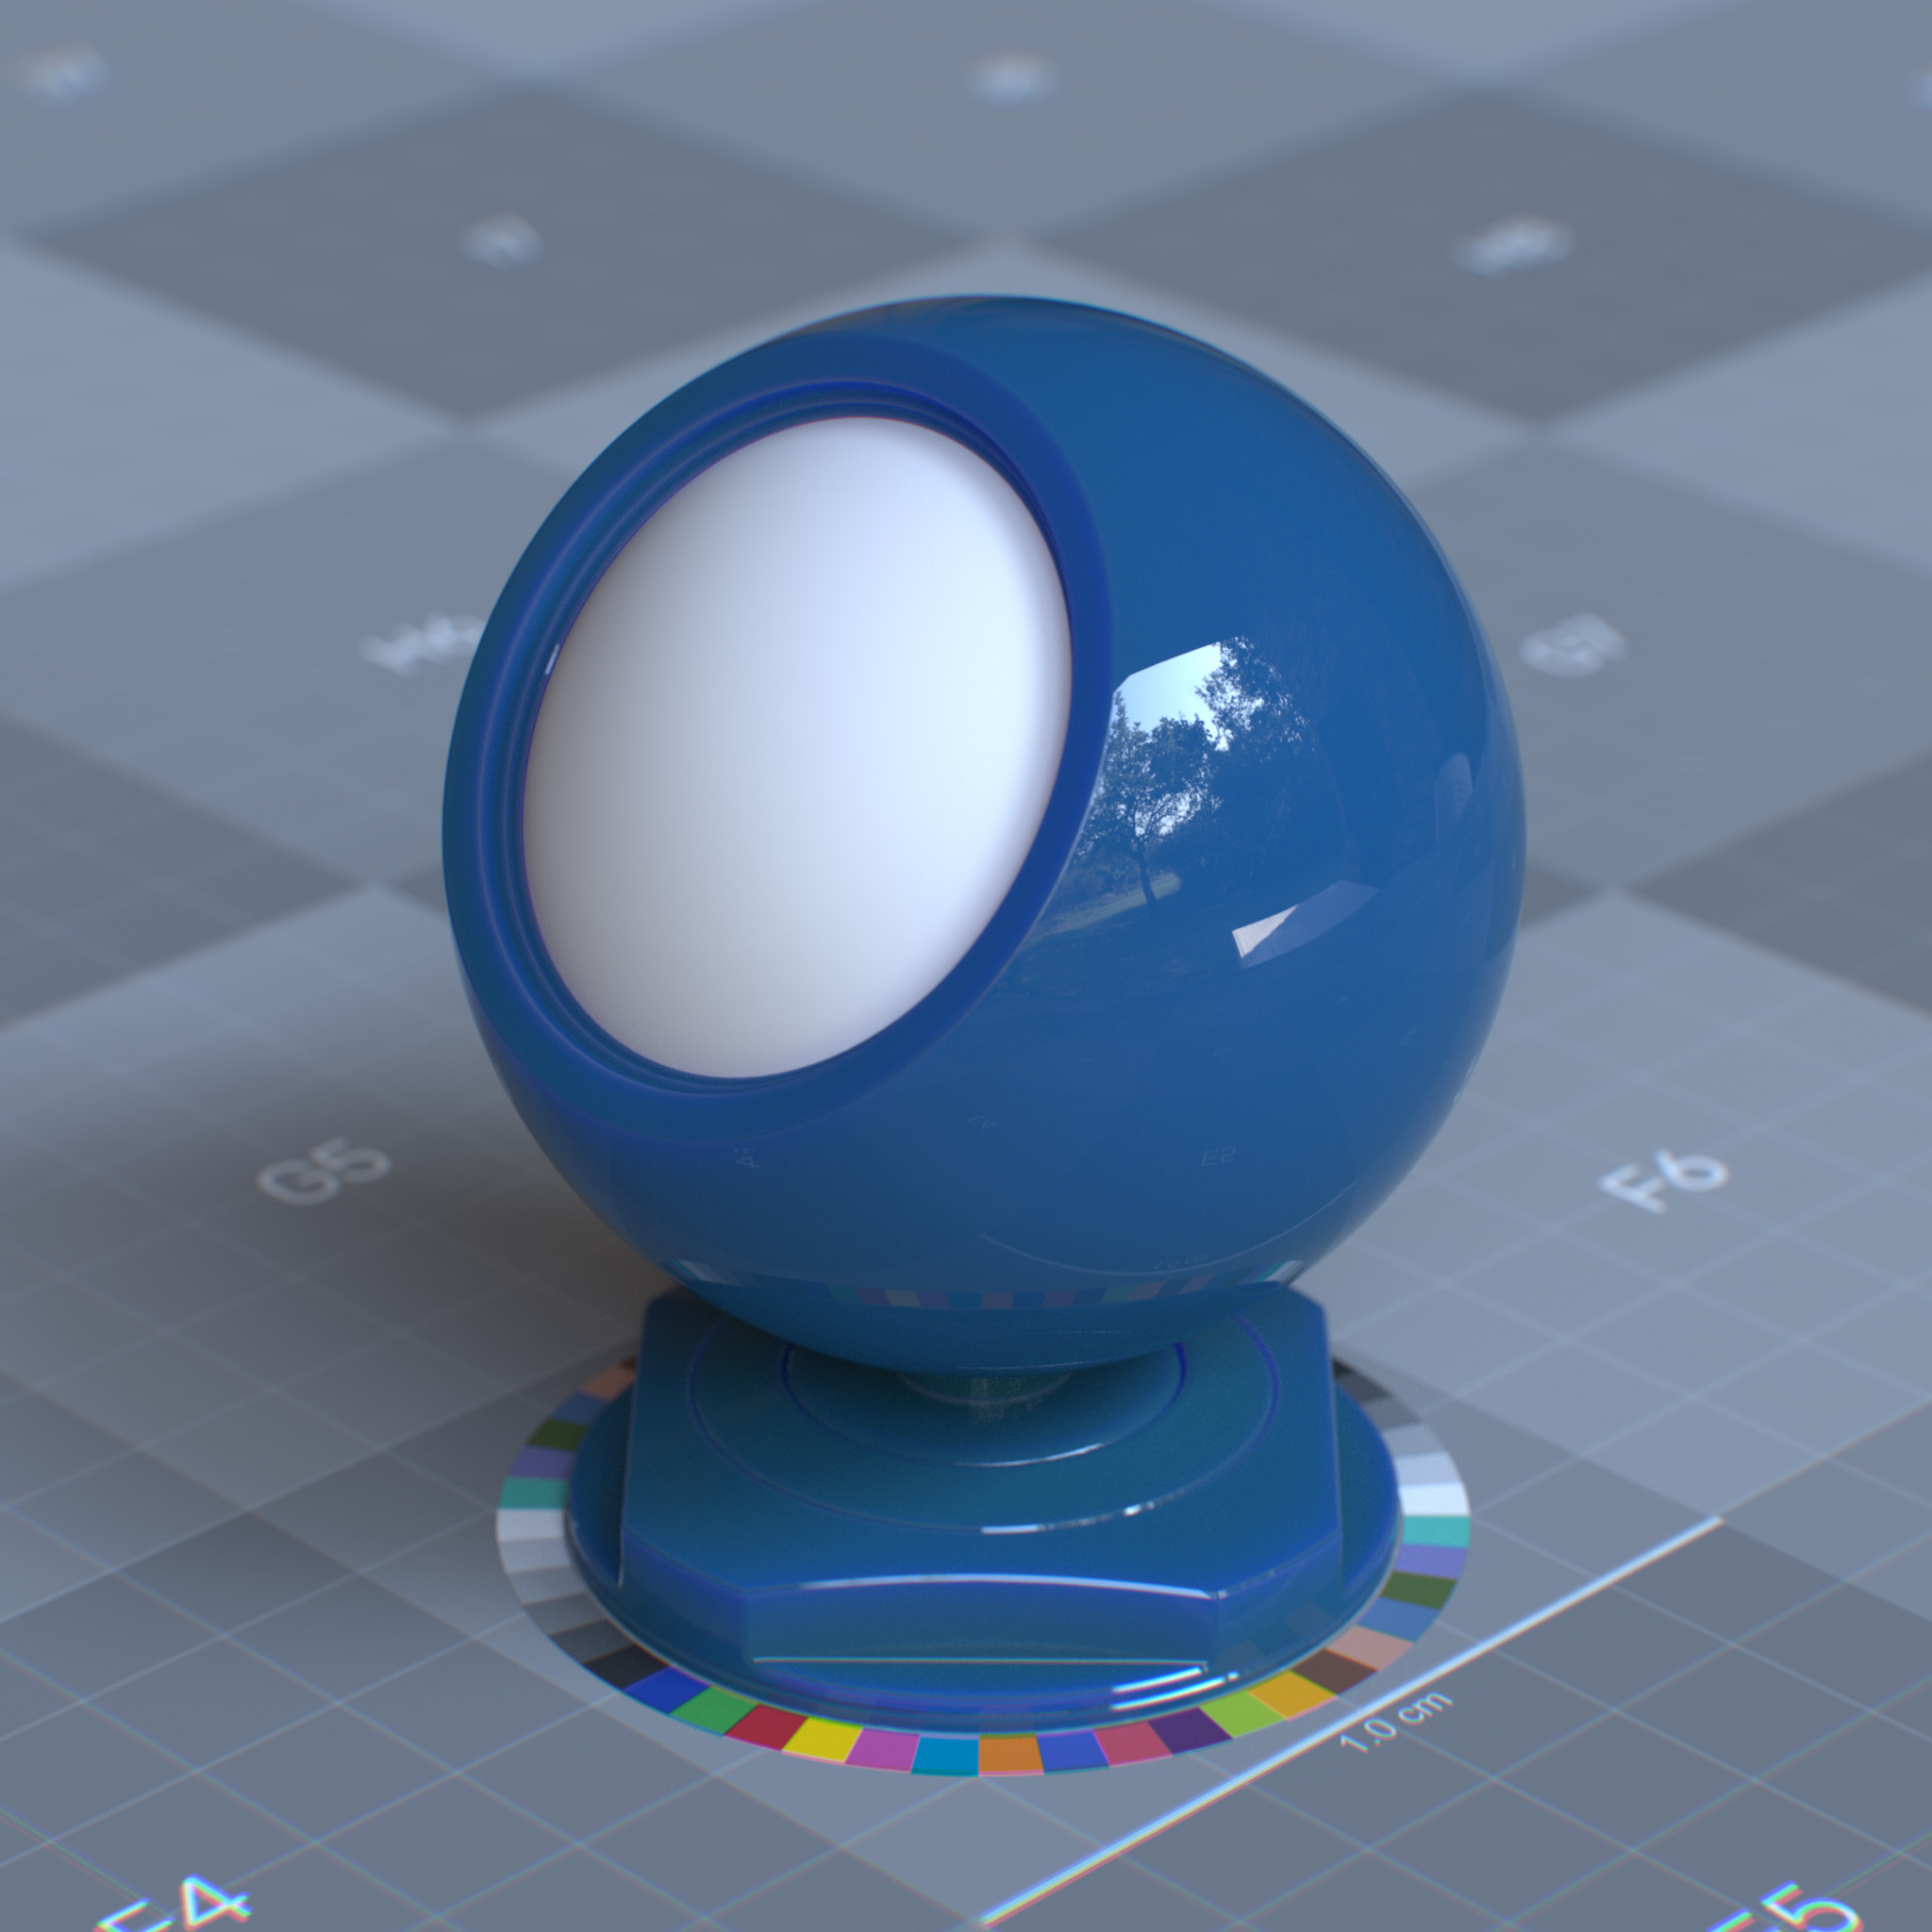 rtx_material_omnisurfacebase_specular_reflection_weight_1p0